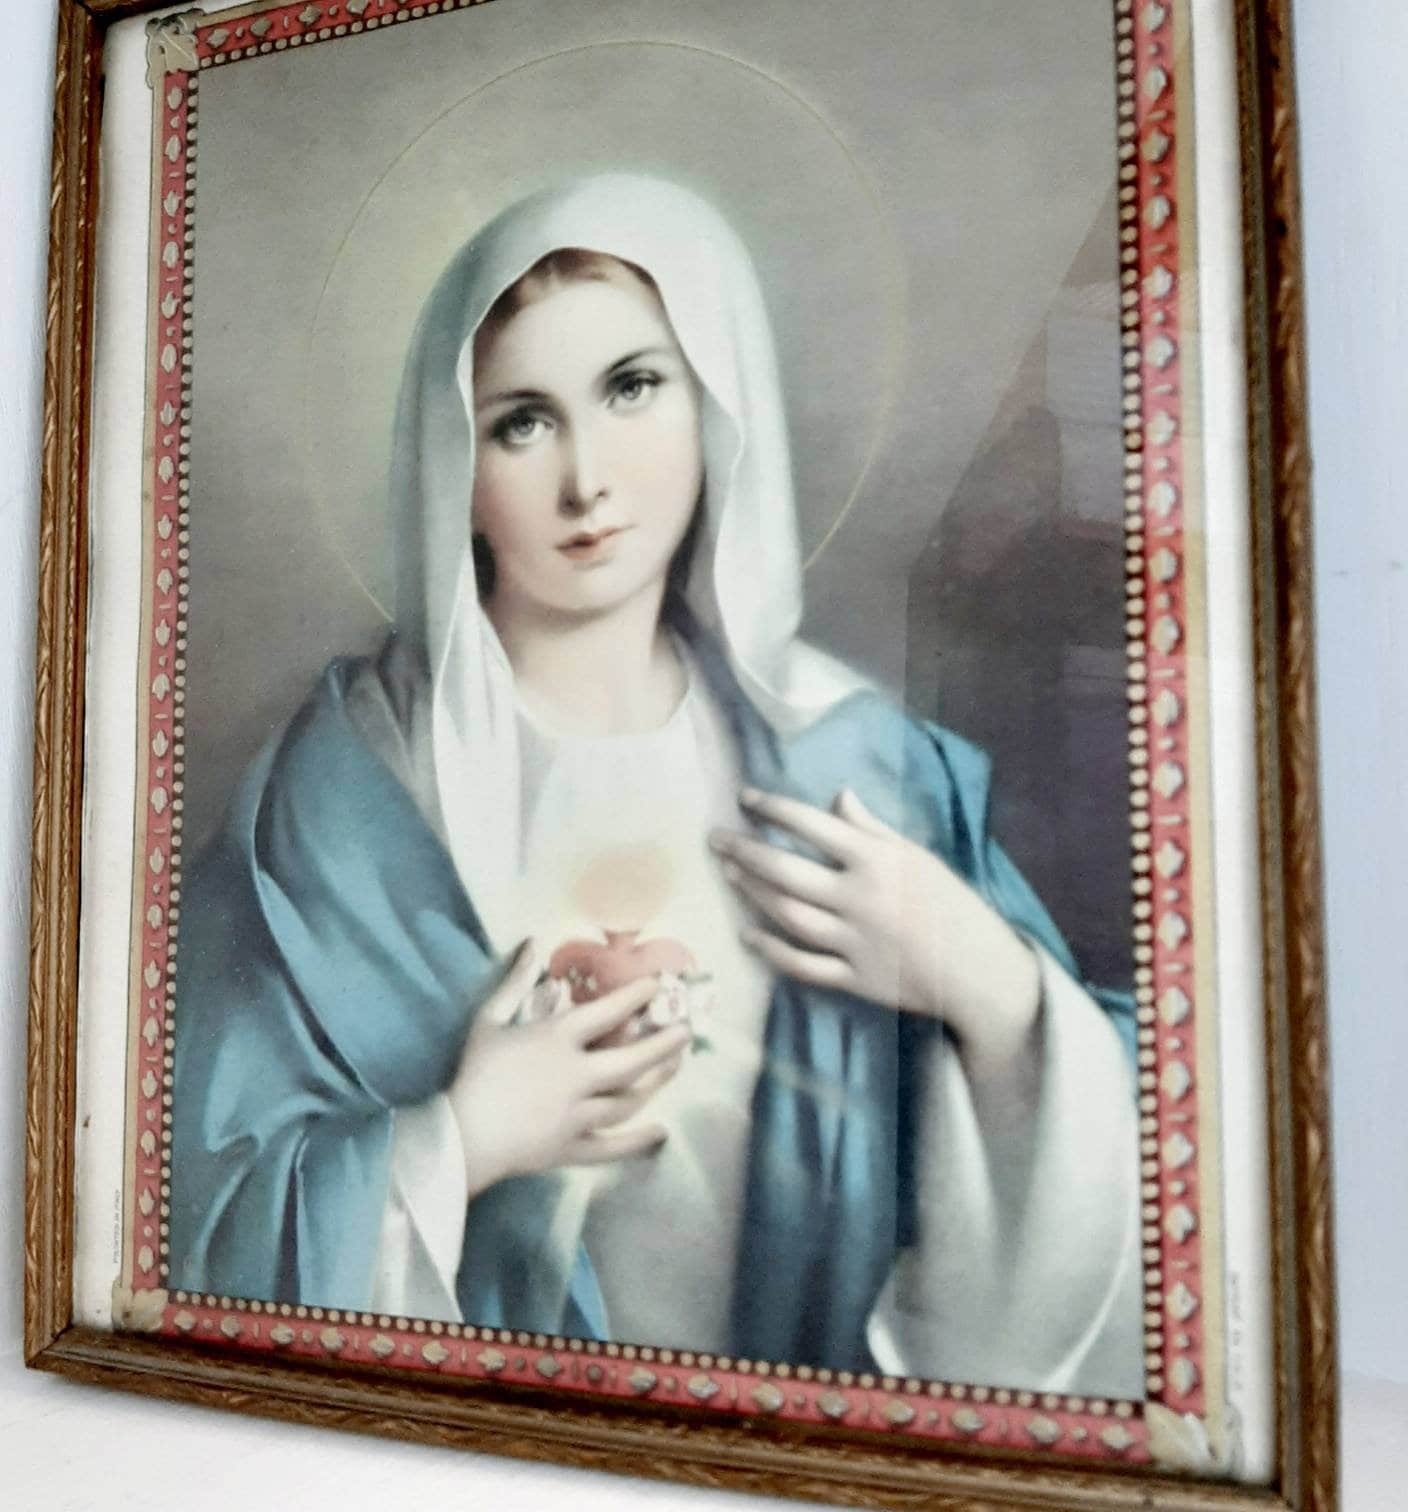 Immaculate Heart of Mary Framed print - Vintage Religious Art annash.or.id